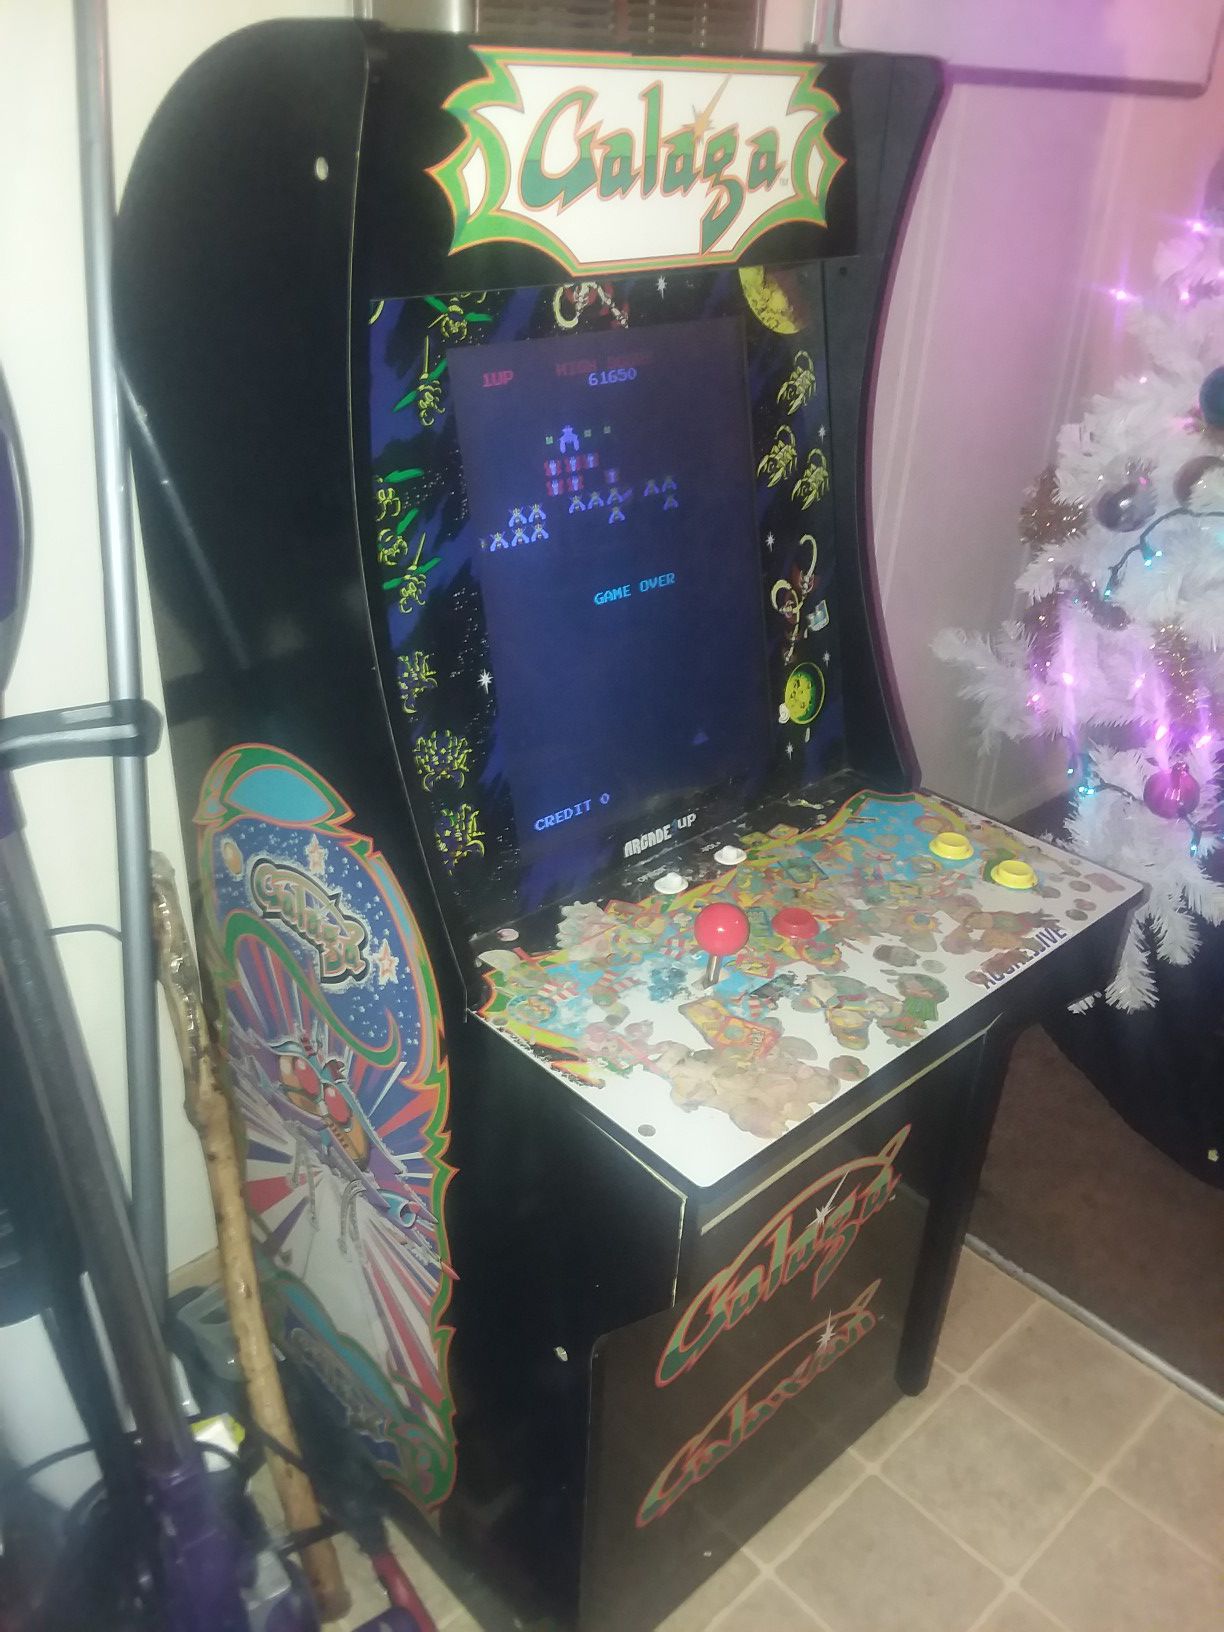 4ft tall video arcade game 2 games in 1